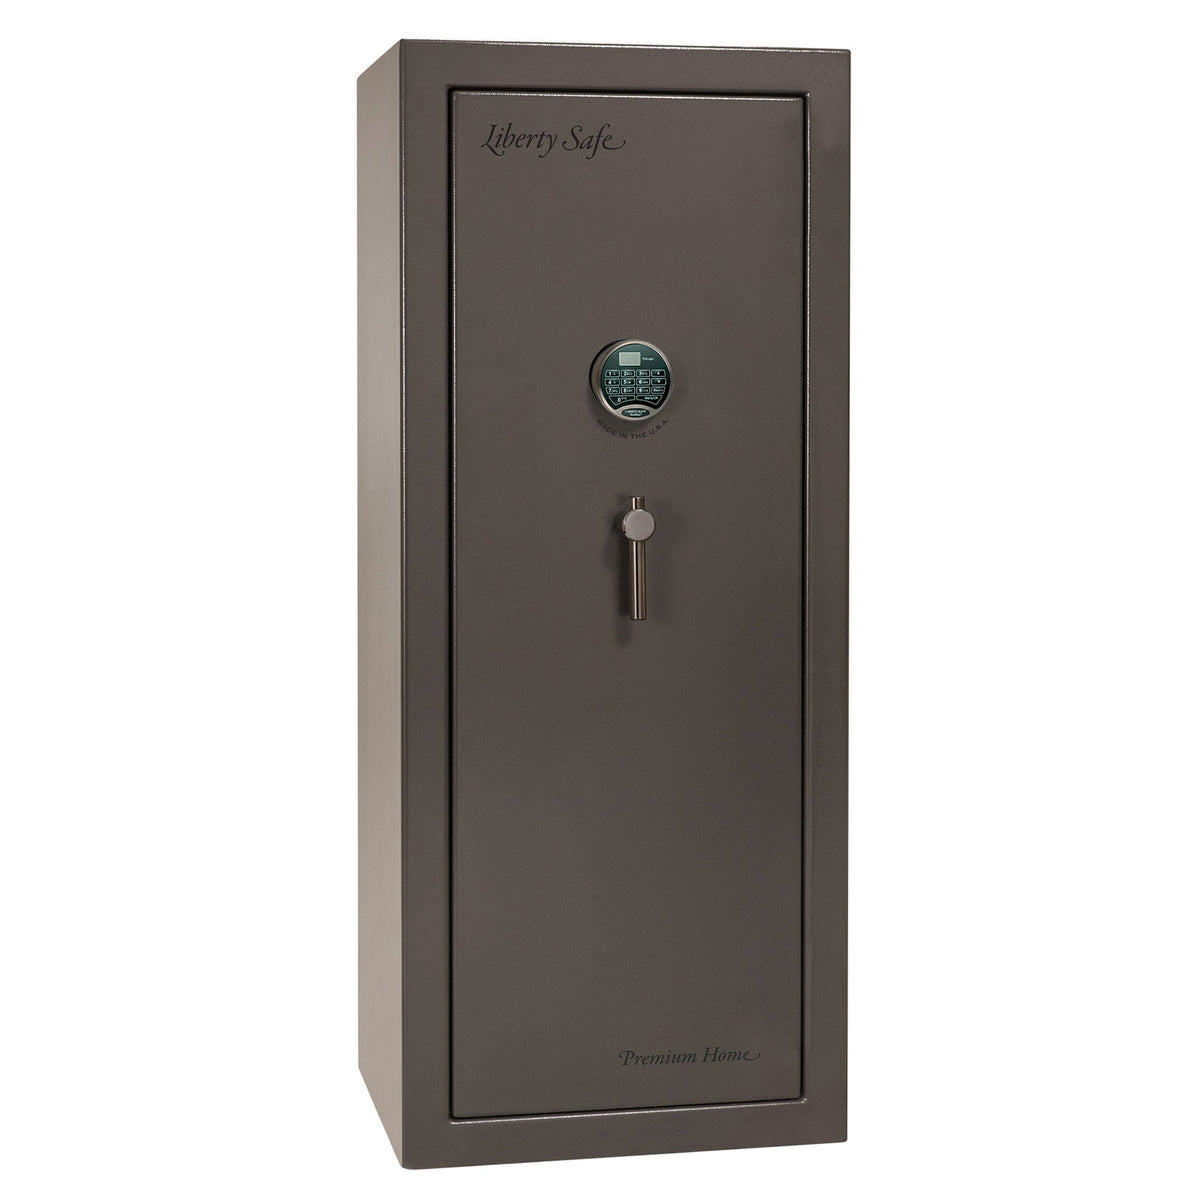 Premium Home Series | Level 7 Security | 2 Hour Fire Protection | 17 | Dimensions: 59.25&quot;(H) x 24&quot;(W) x 20.25&quot;(D) | Gray Marble - Closed Door